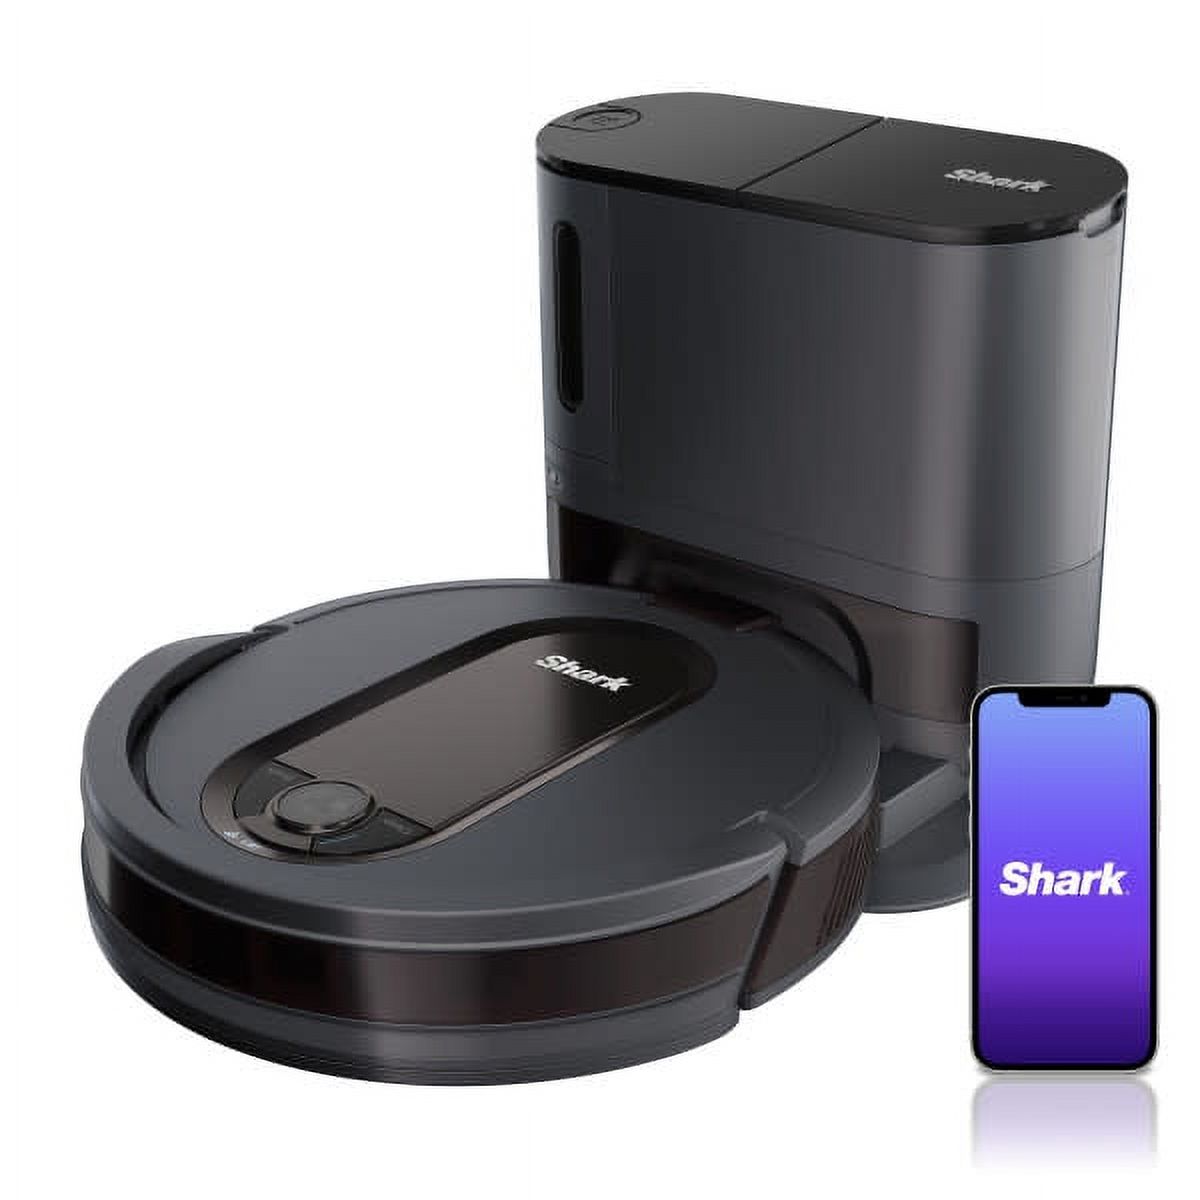 Shark EZ Robot Vacuum with Self-Empty Base, Row-by-Row Cleaning, RV915S - image 1 of 8